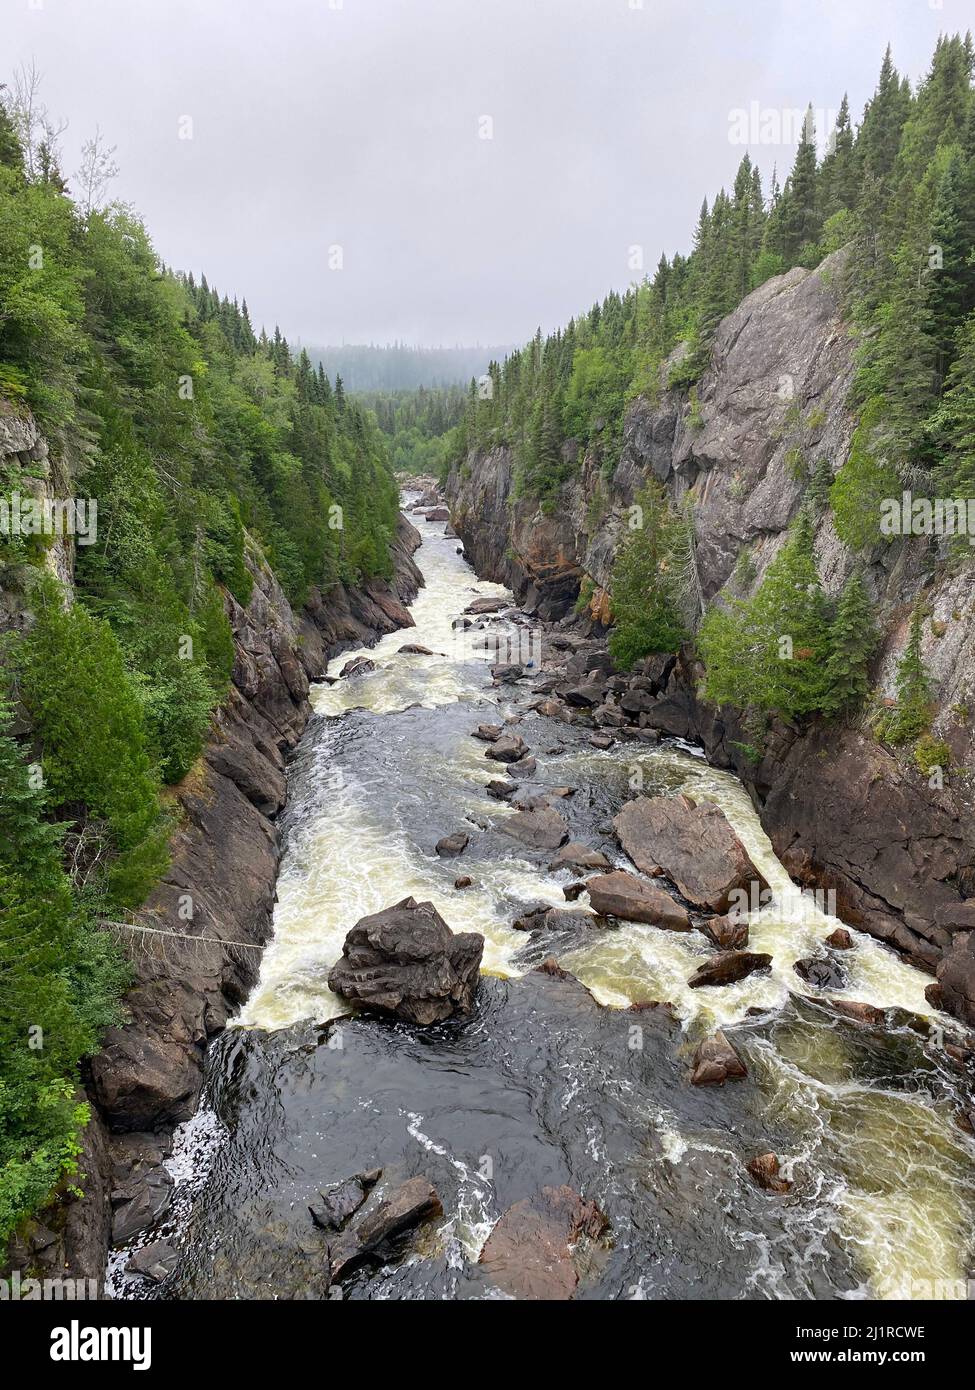 Fast-moving river through a steep canyon in a pine forest in northern Ontario Stock Photo